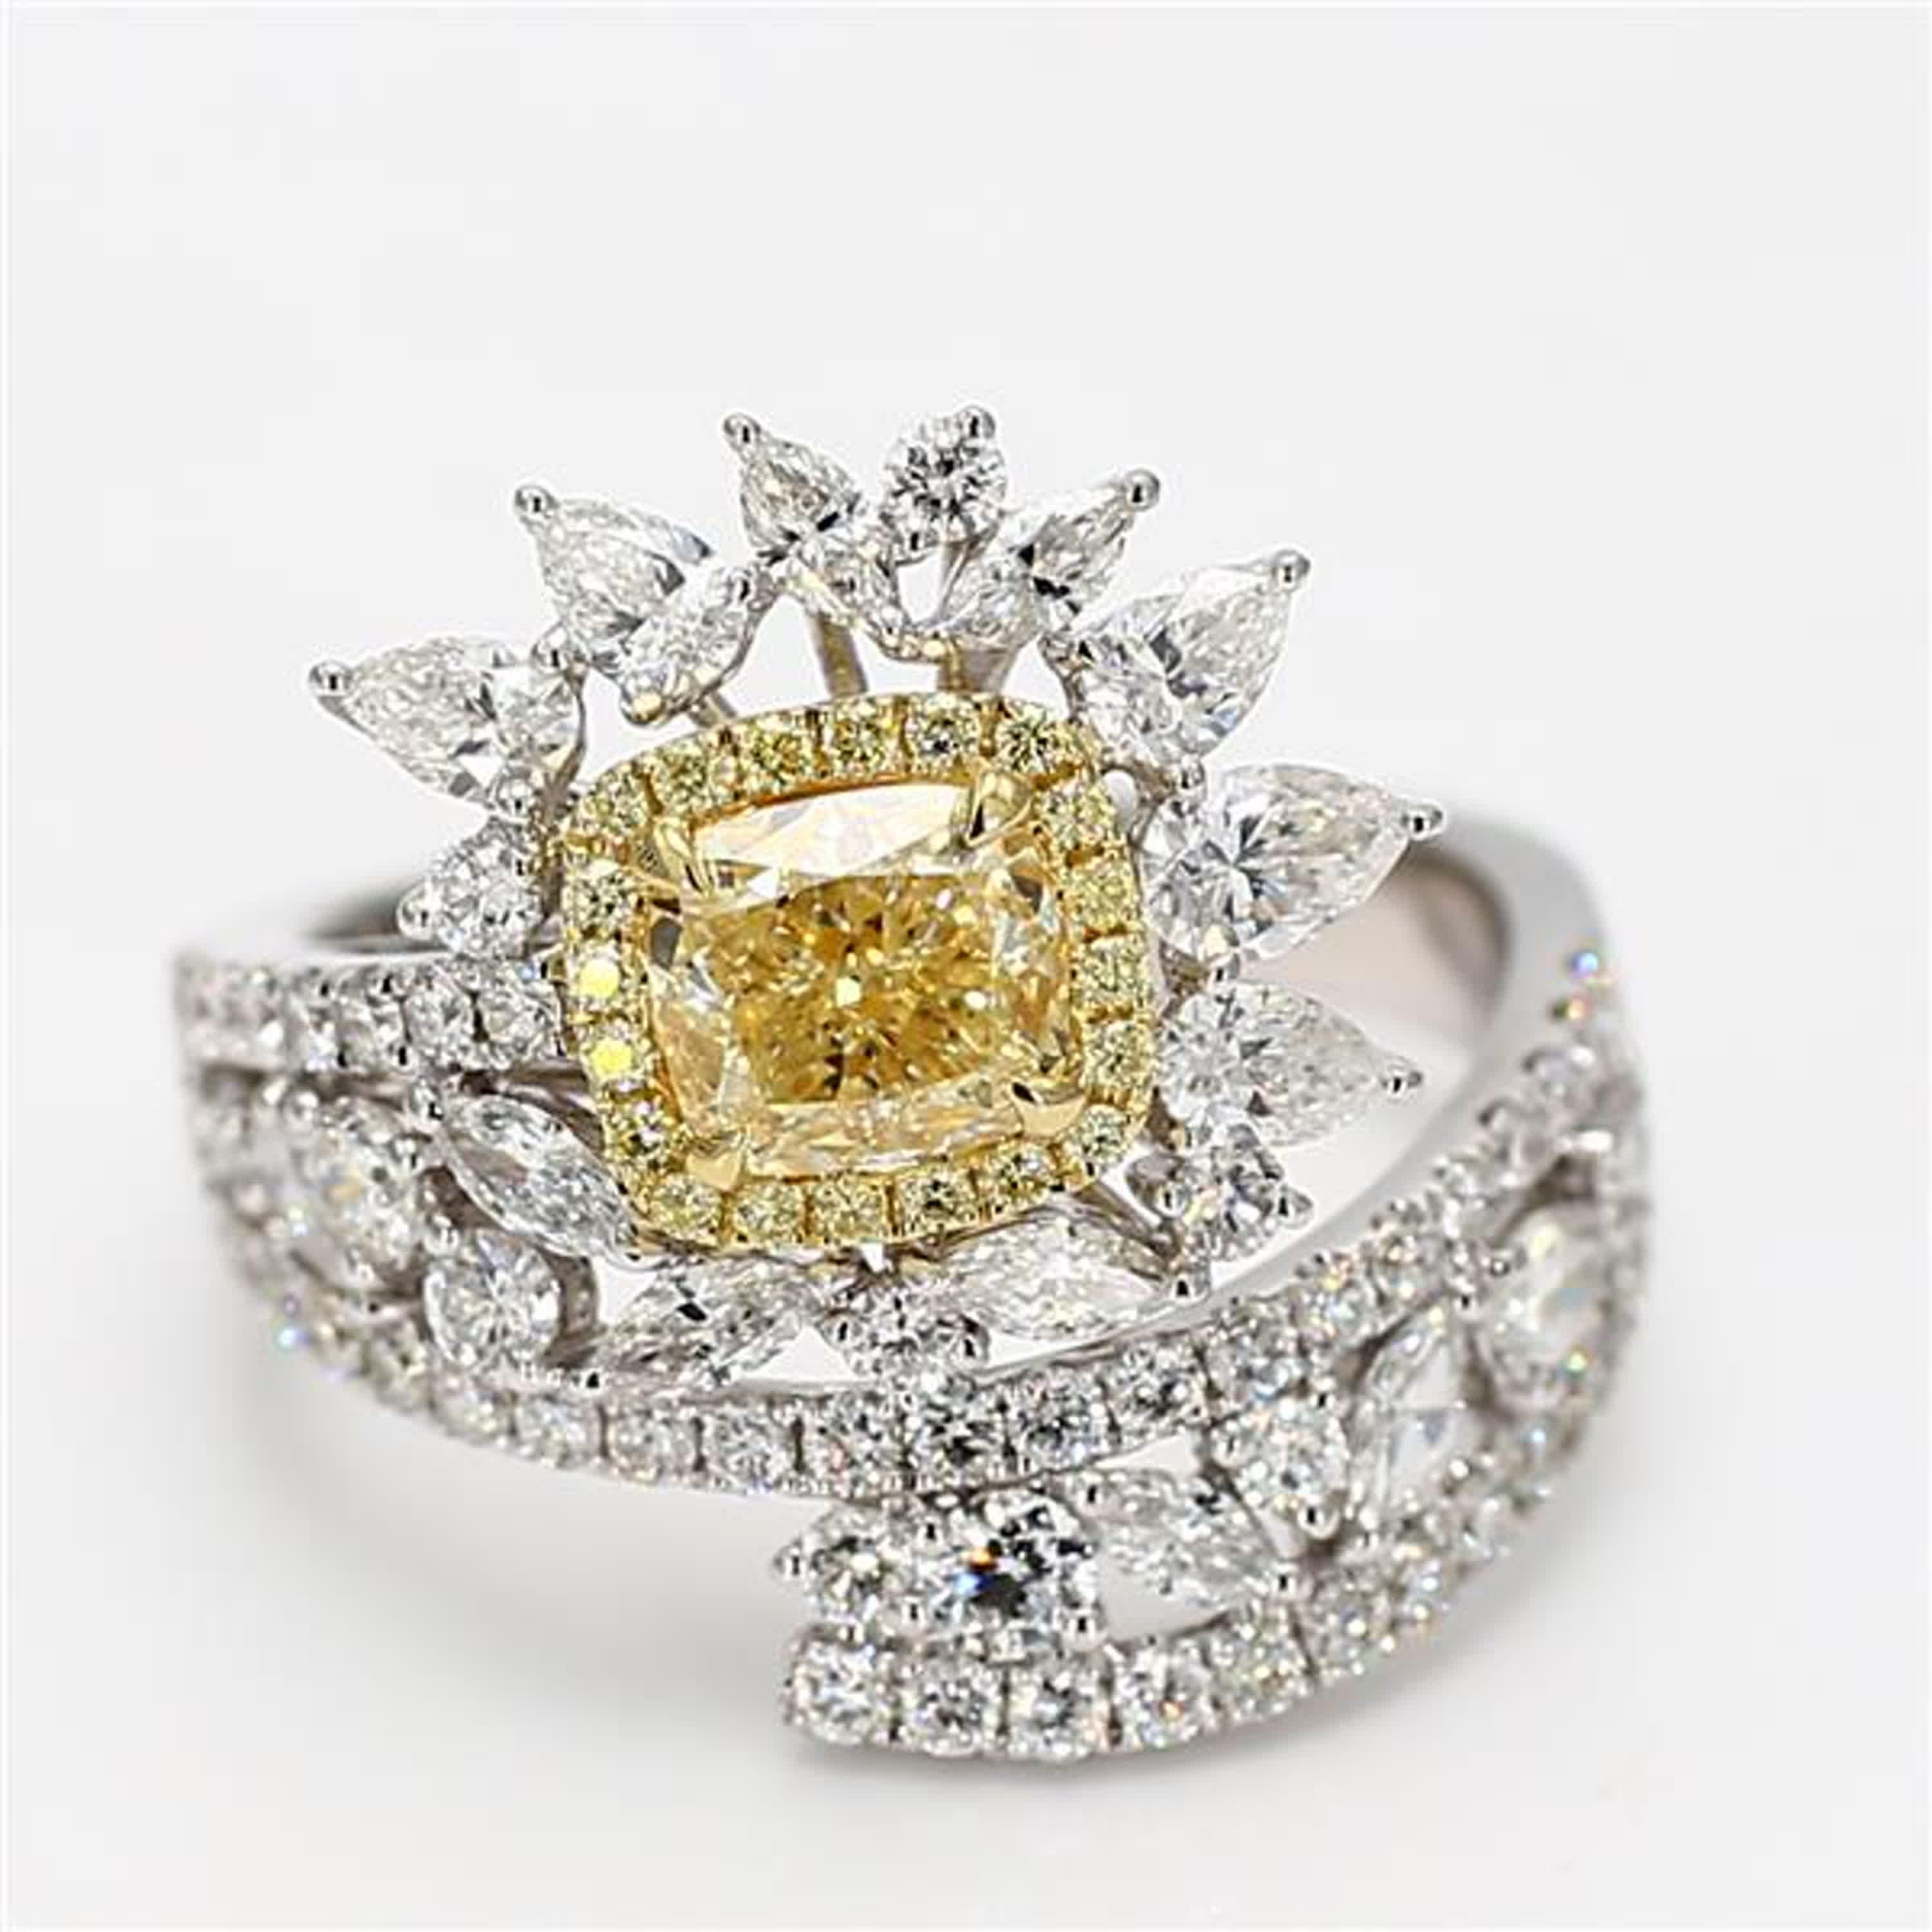 RareGemWorld's classic GIA certified diamond ring. Mounted in a beautiful 18K Yellow and White Gold setting with a natural cushion cut yellow diamond. The yellow diamond is surrounded by natural marquise cut white diamonds, natural princess cut